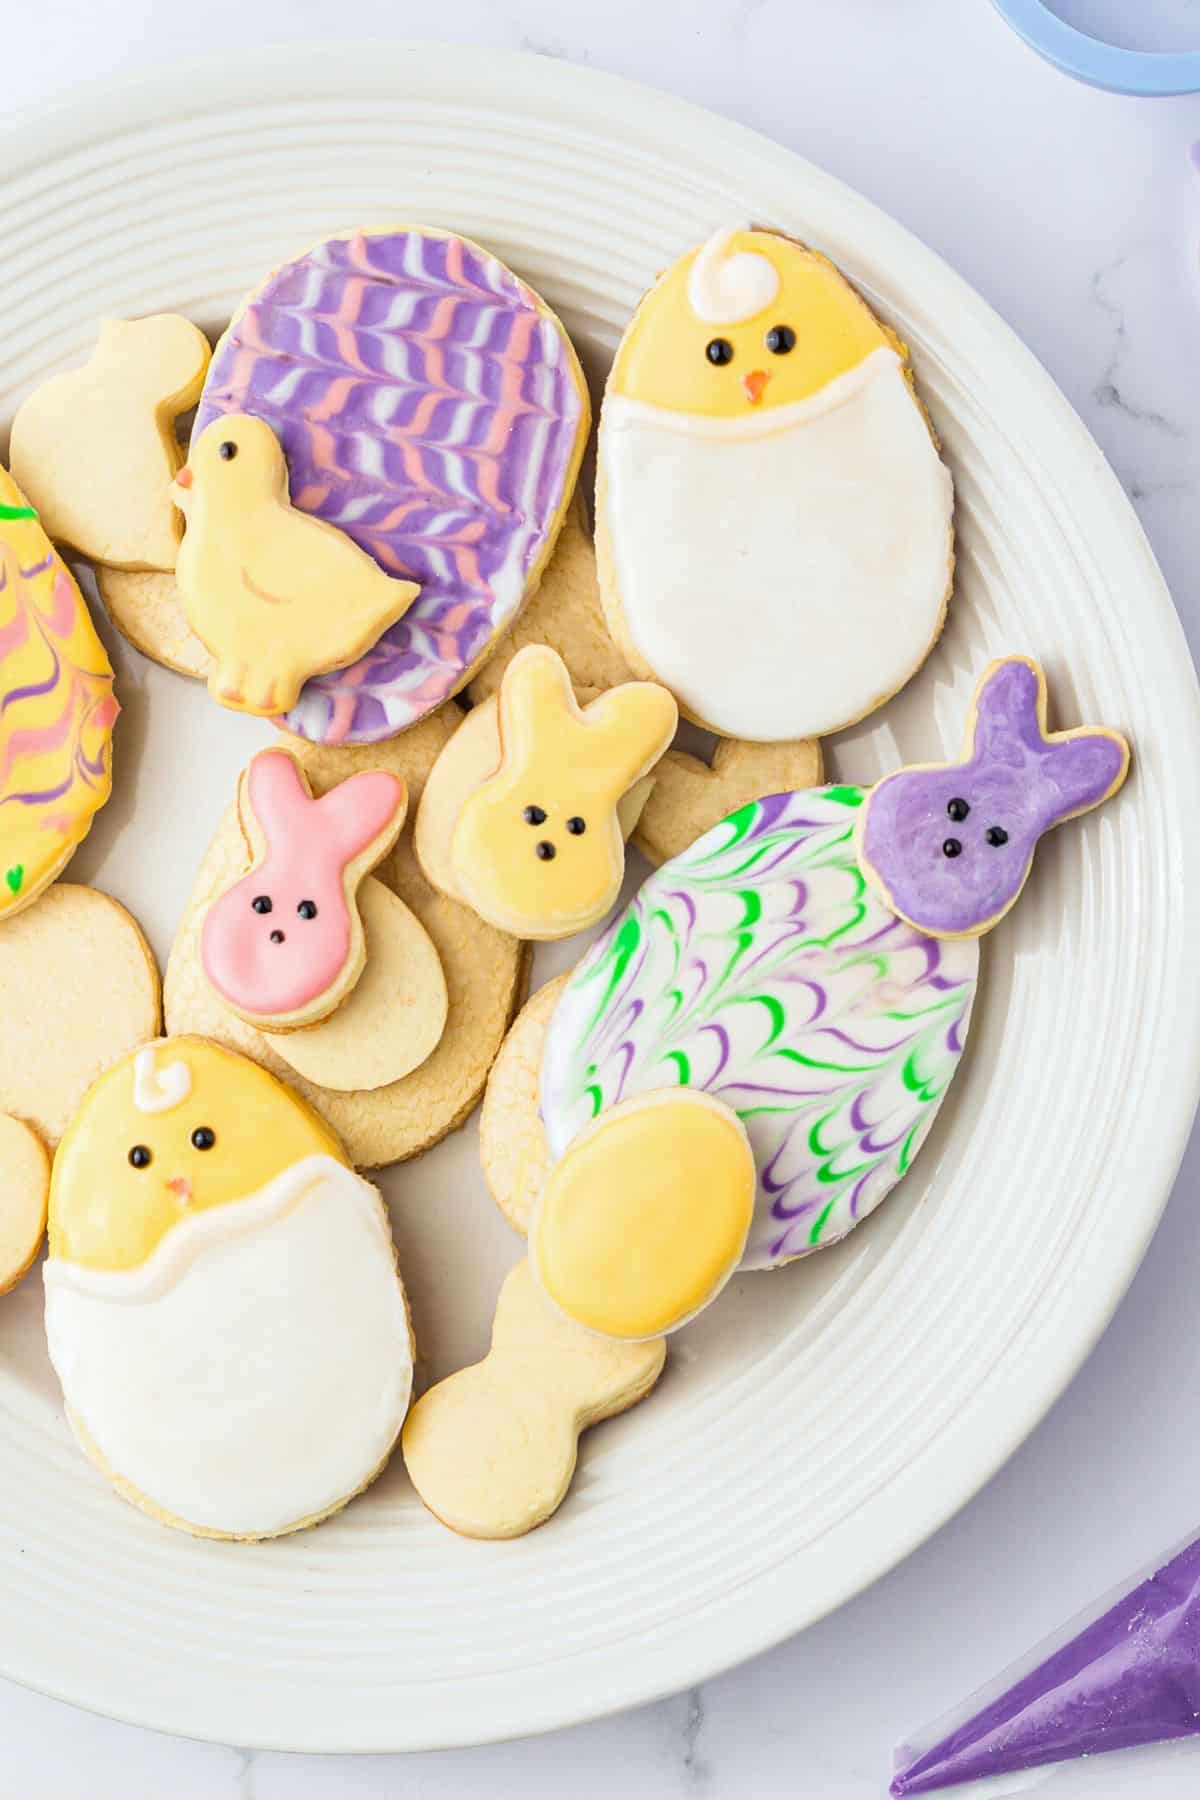 A plate full of gluten free Easter cookies on a white plate.